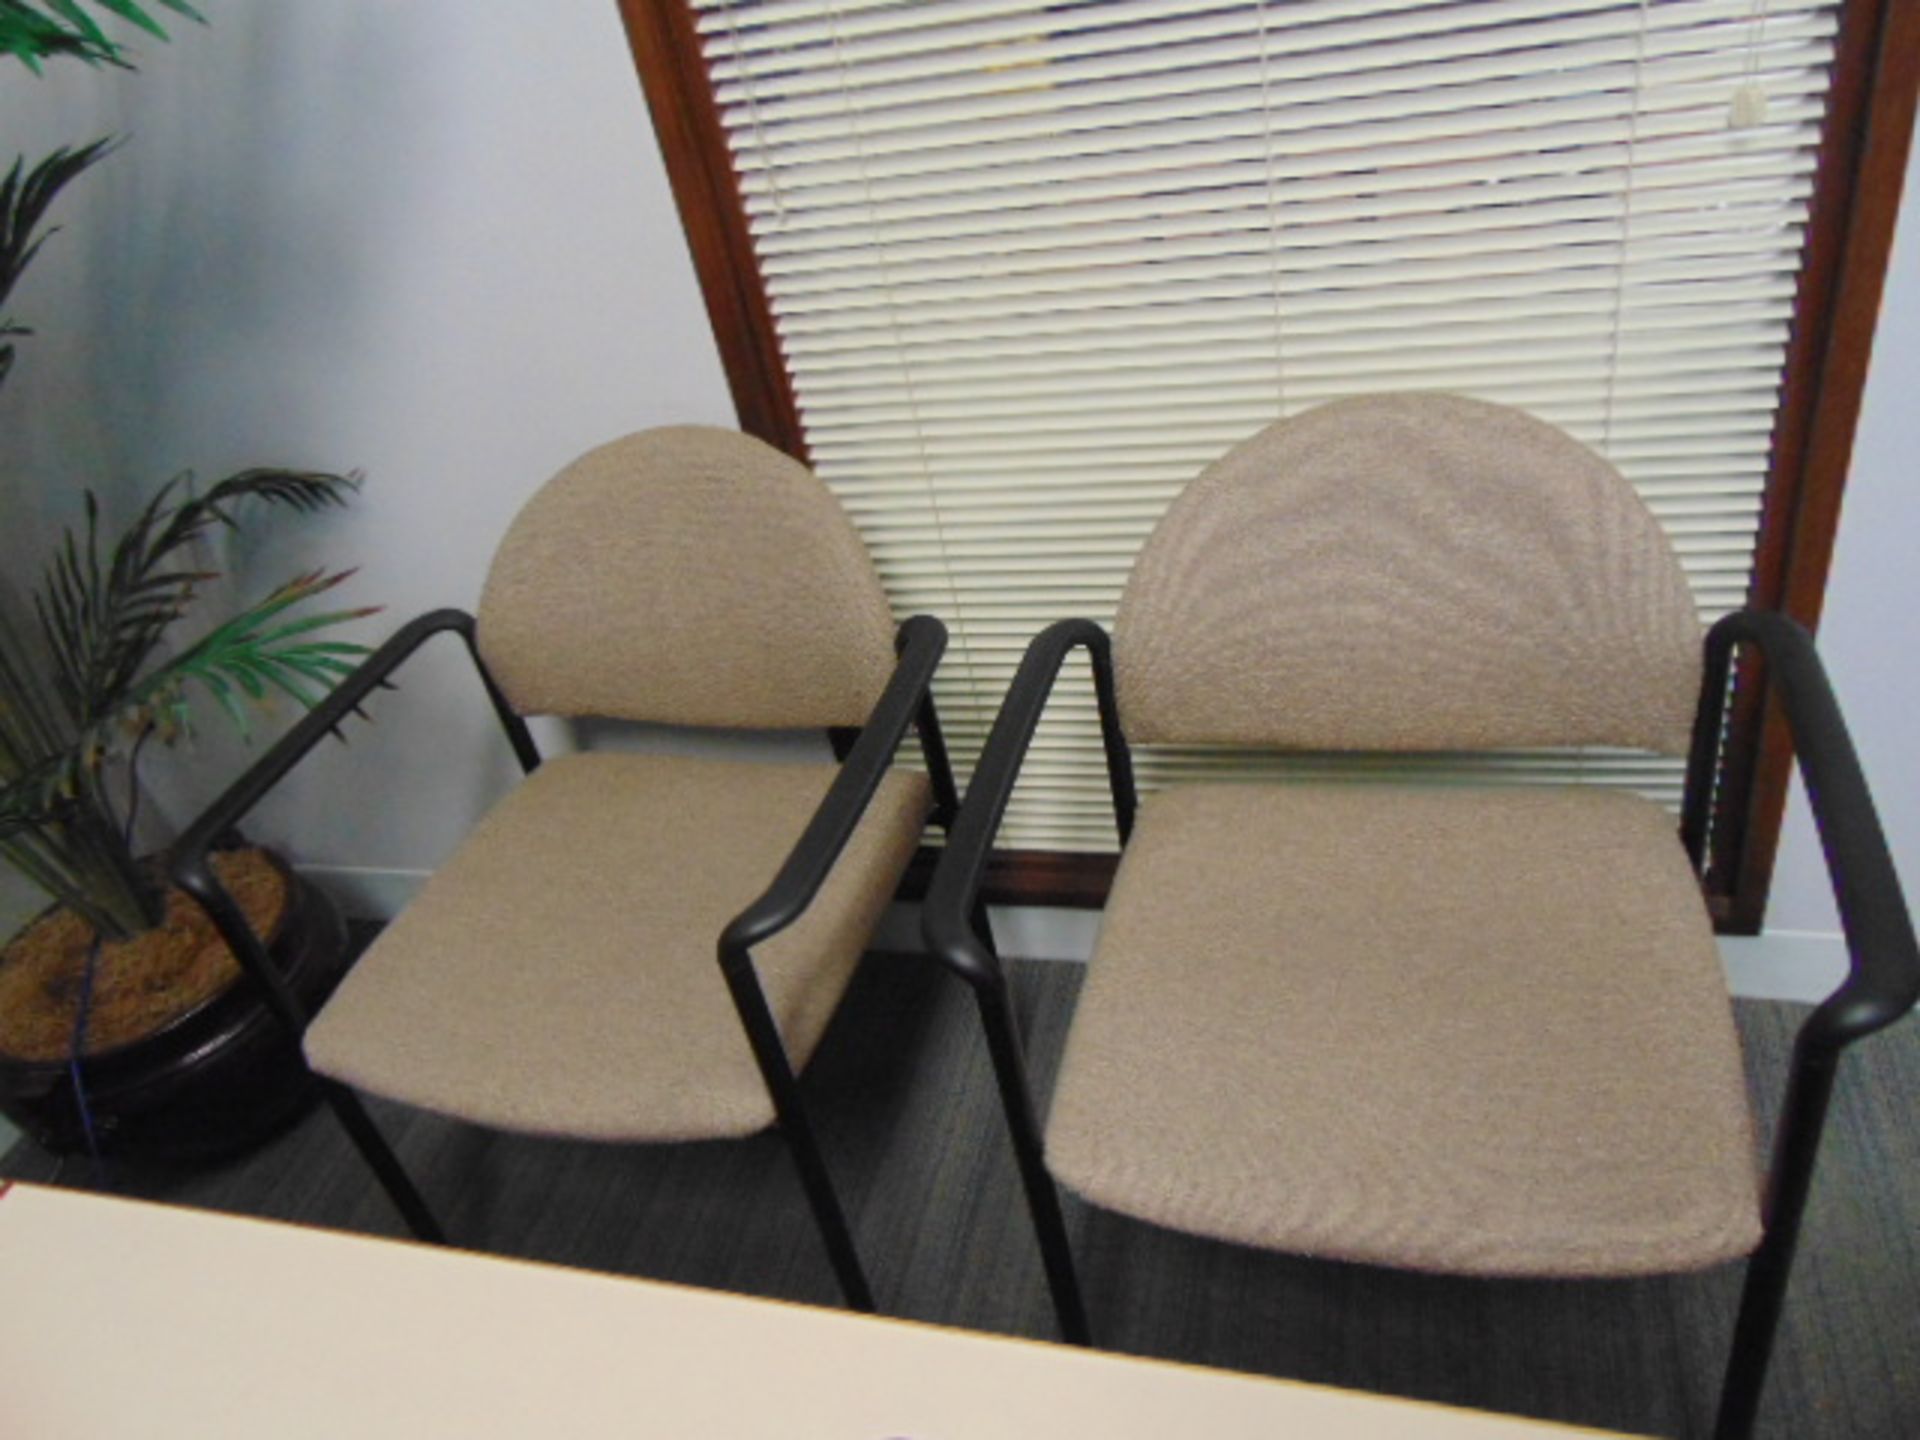 LOT CONSISTING OF: L-shaped desk, table, printer, ornamental plant, white board & (6) chairs - Image 3 of 6